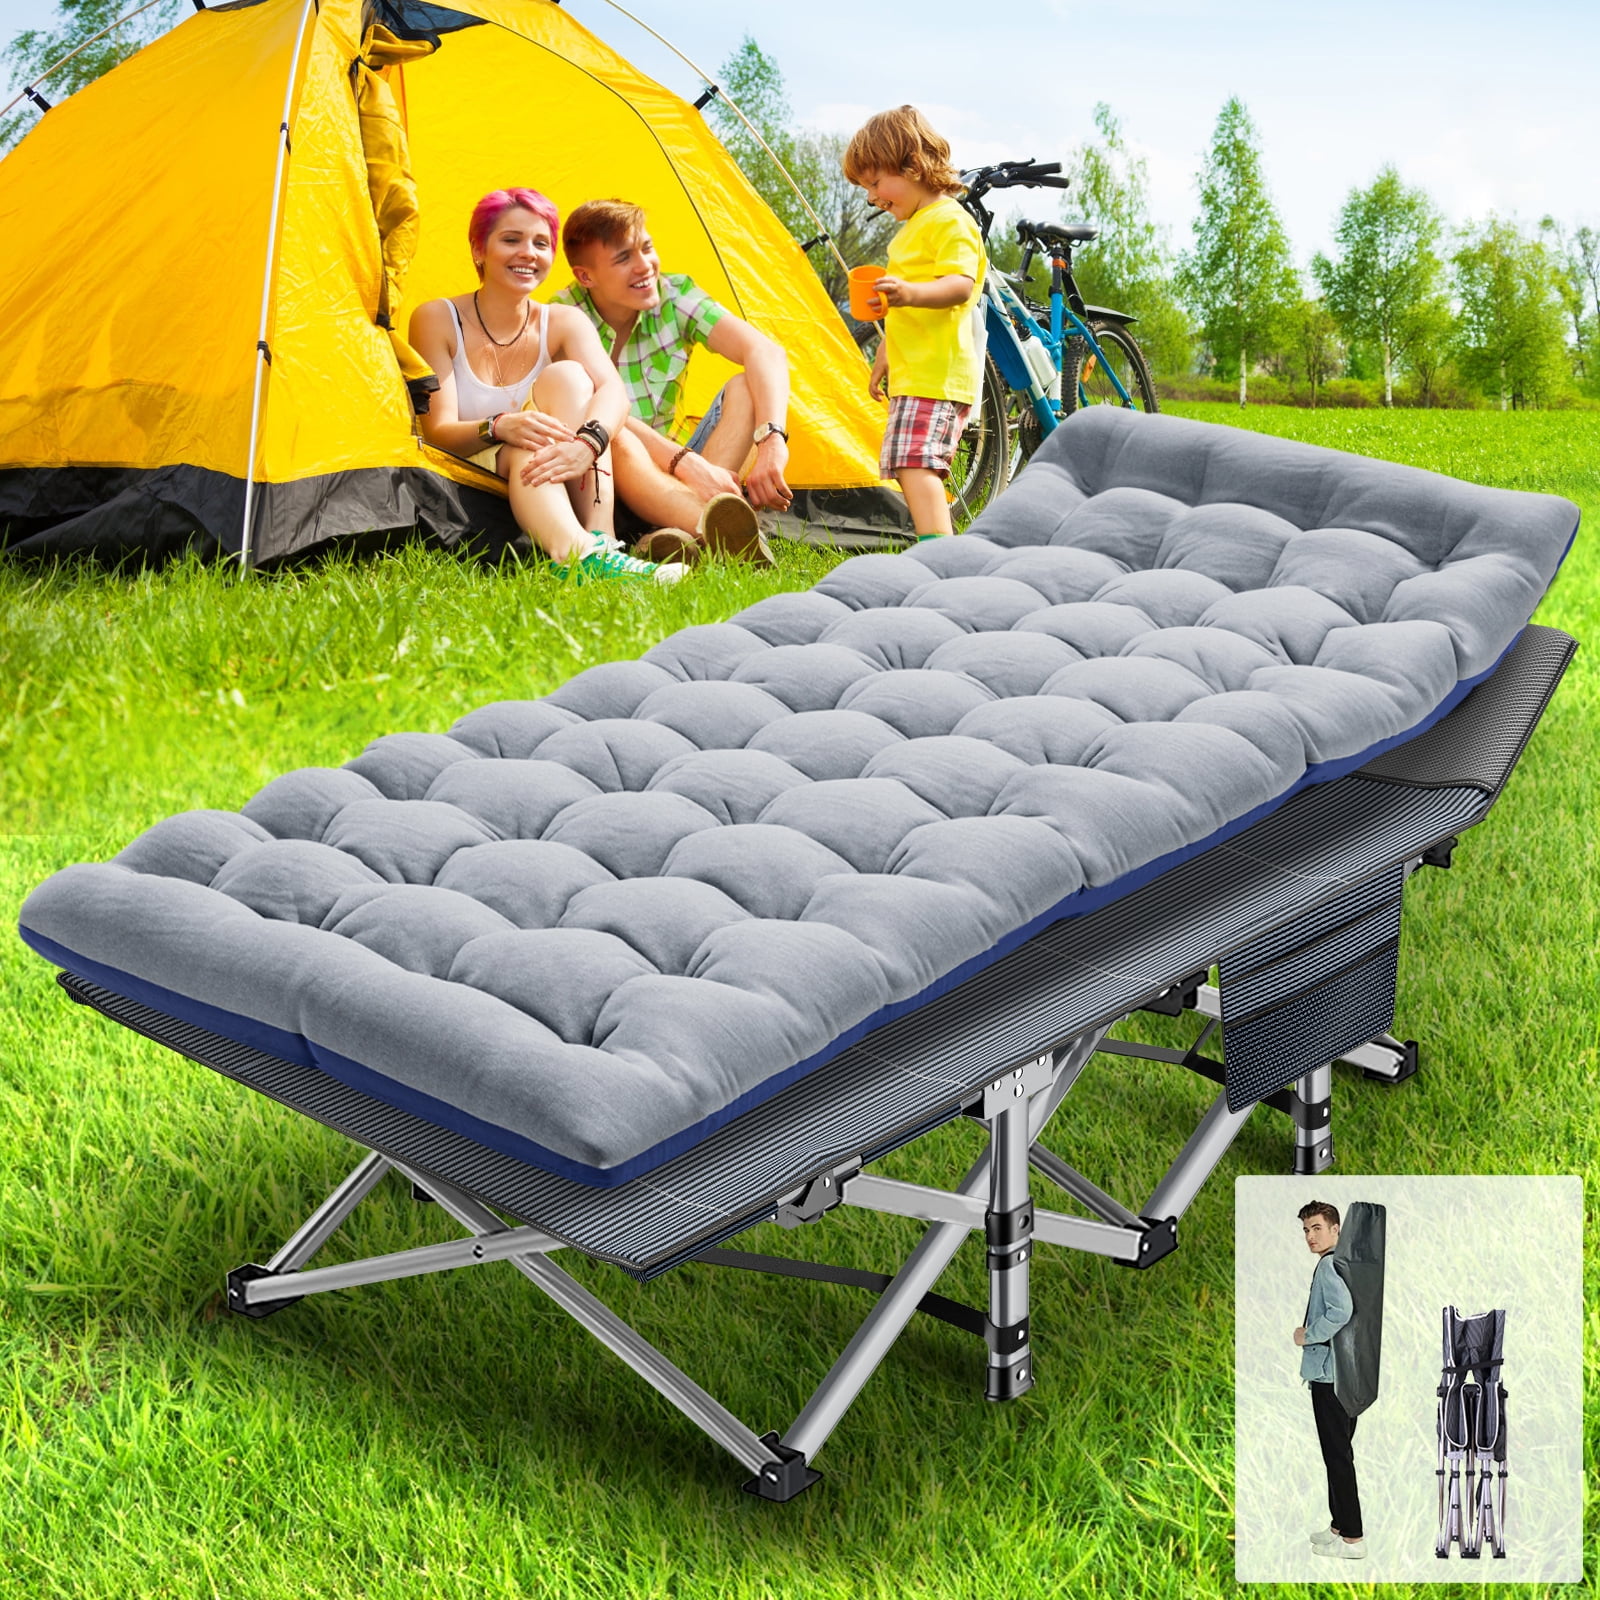 FICISOG Folding Camping Cots for Adults 900lbs Double Layer Oxford Sleeping Cots with Carry Bag